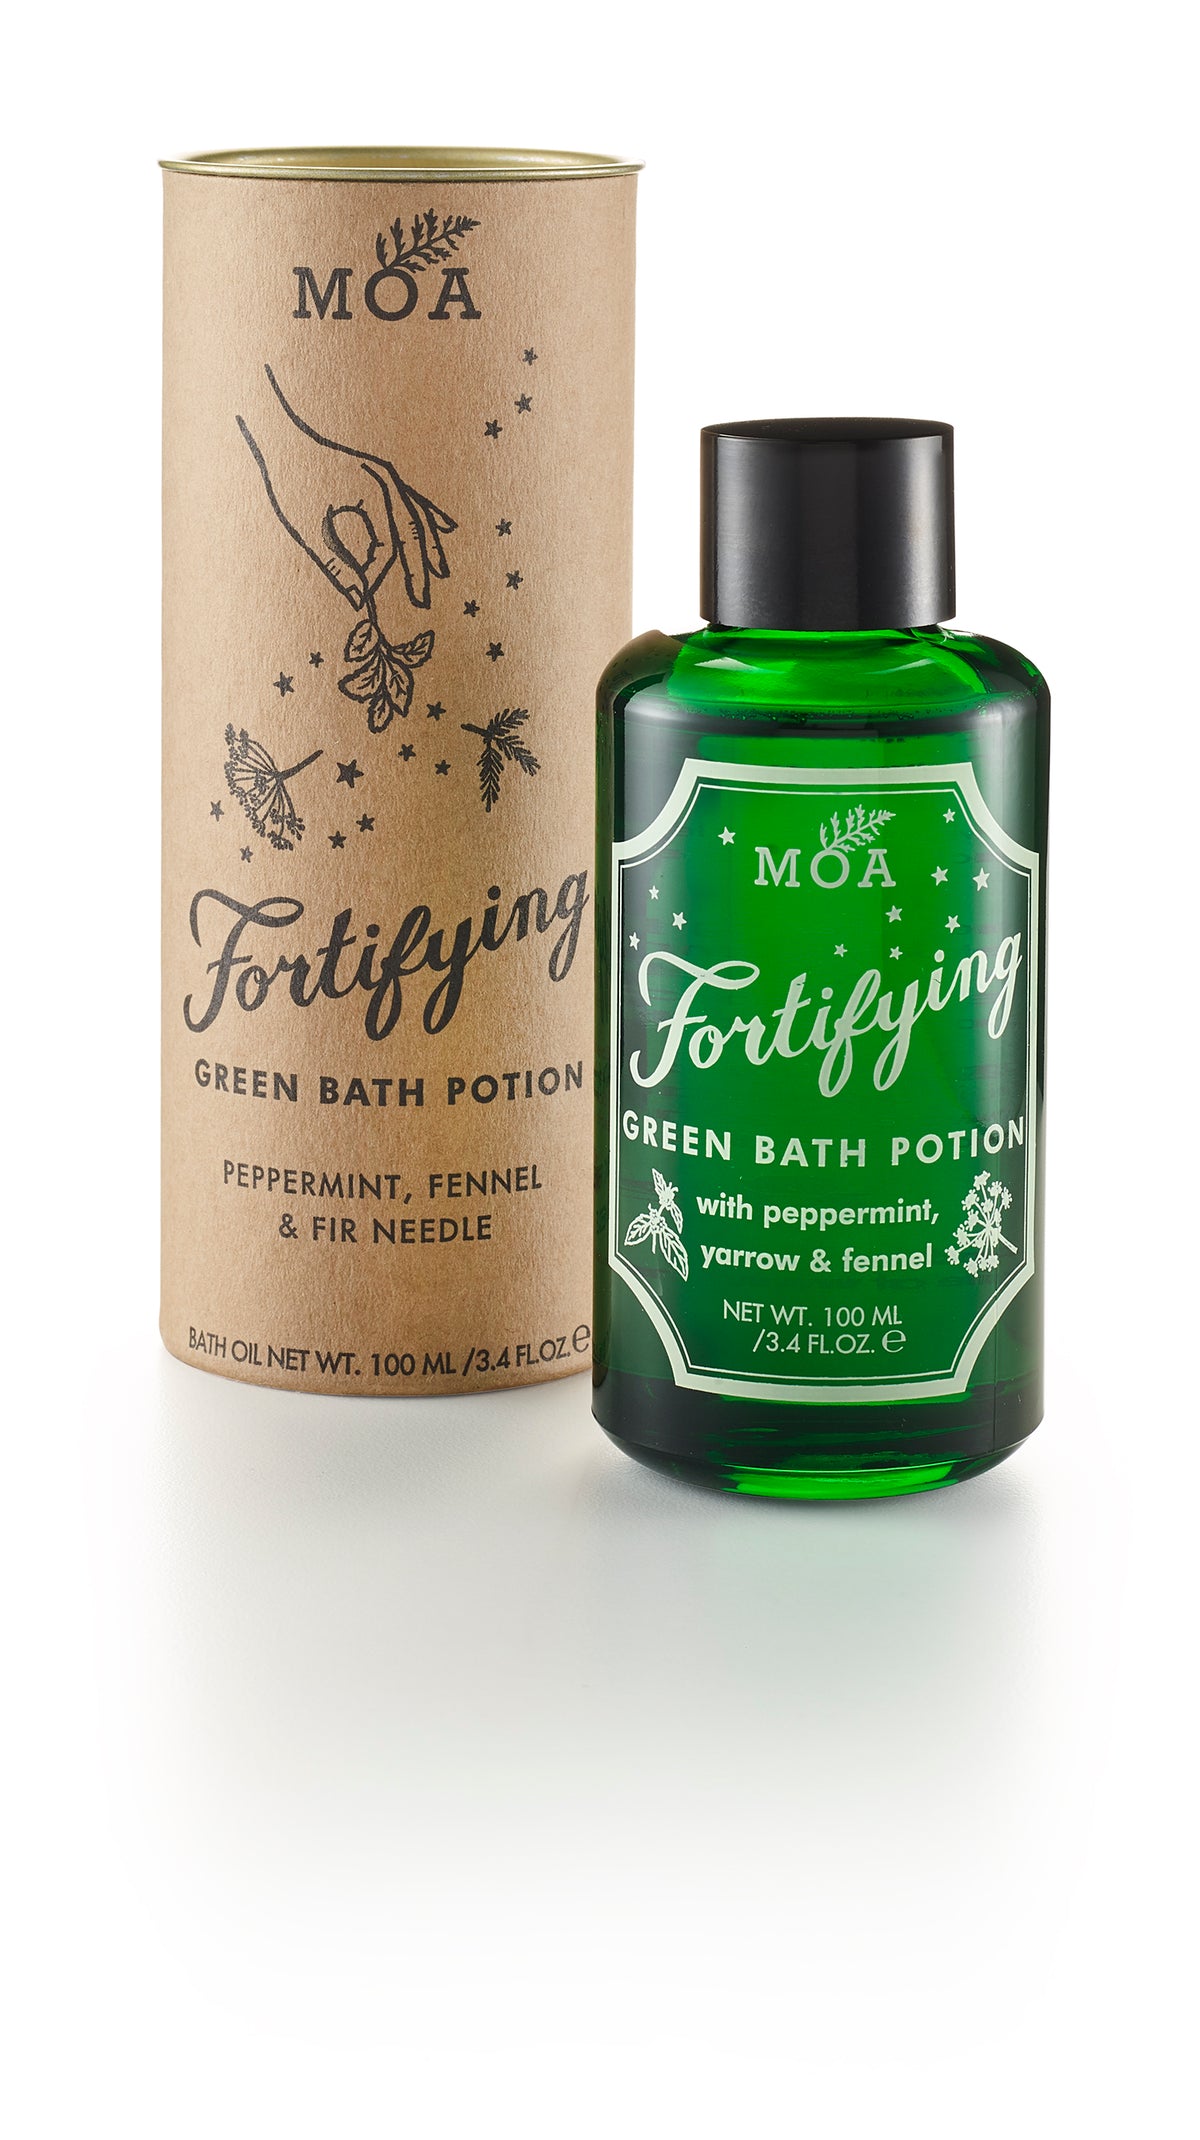 Fortifying Green Bath Potion (bath oil) from MOA